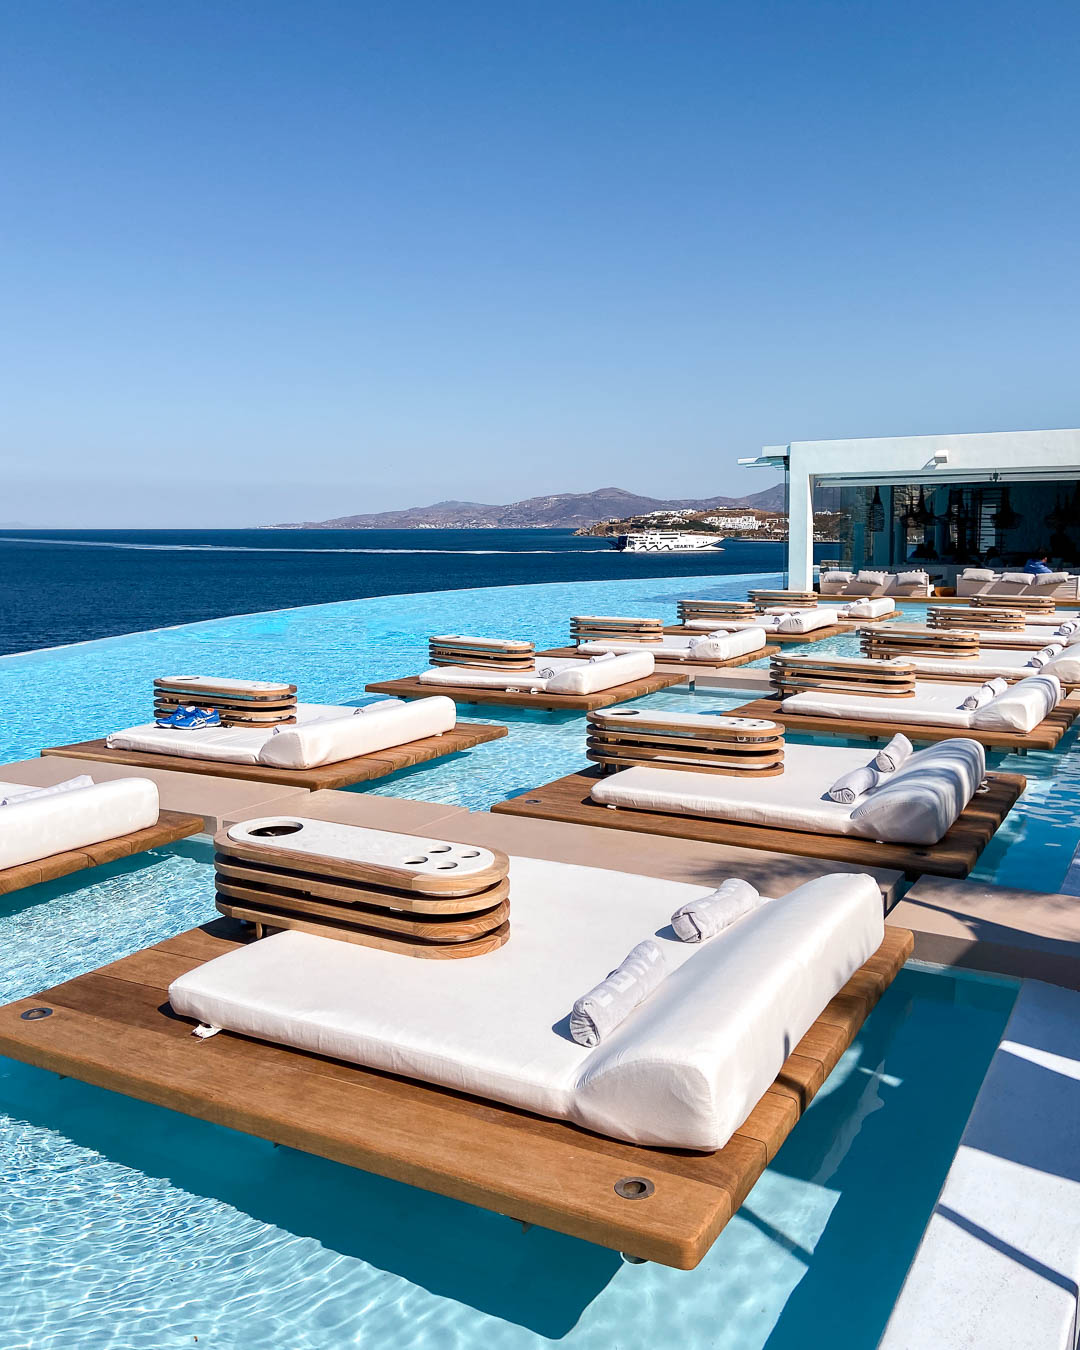 10 Best Luxury Hotels In Mykonos And Santorini • We Love Our Life